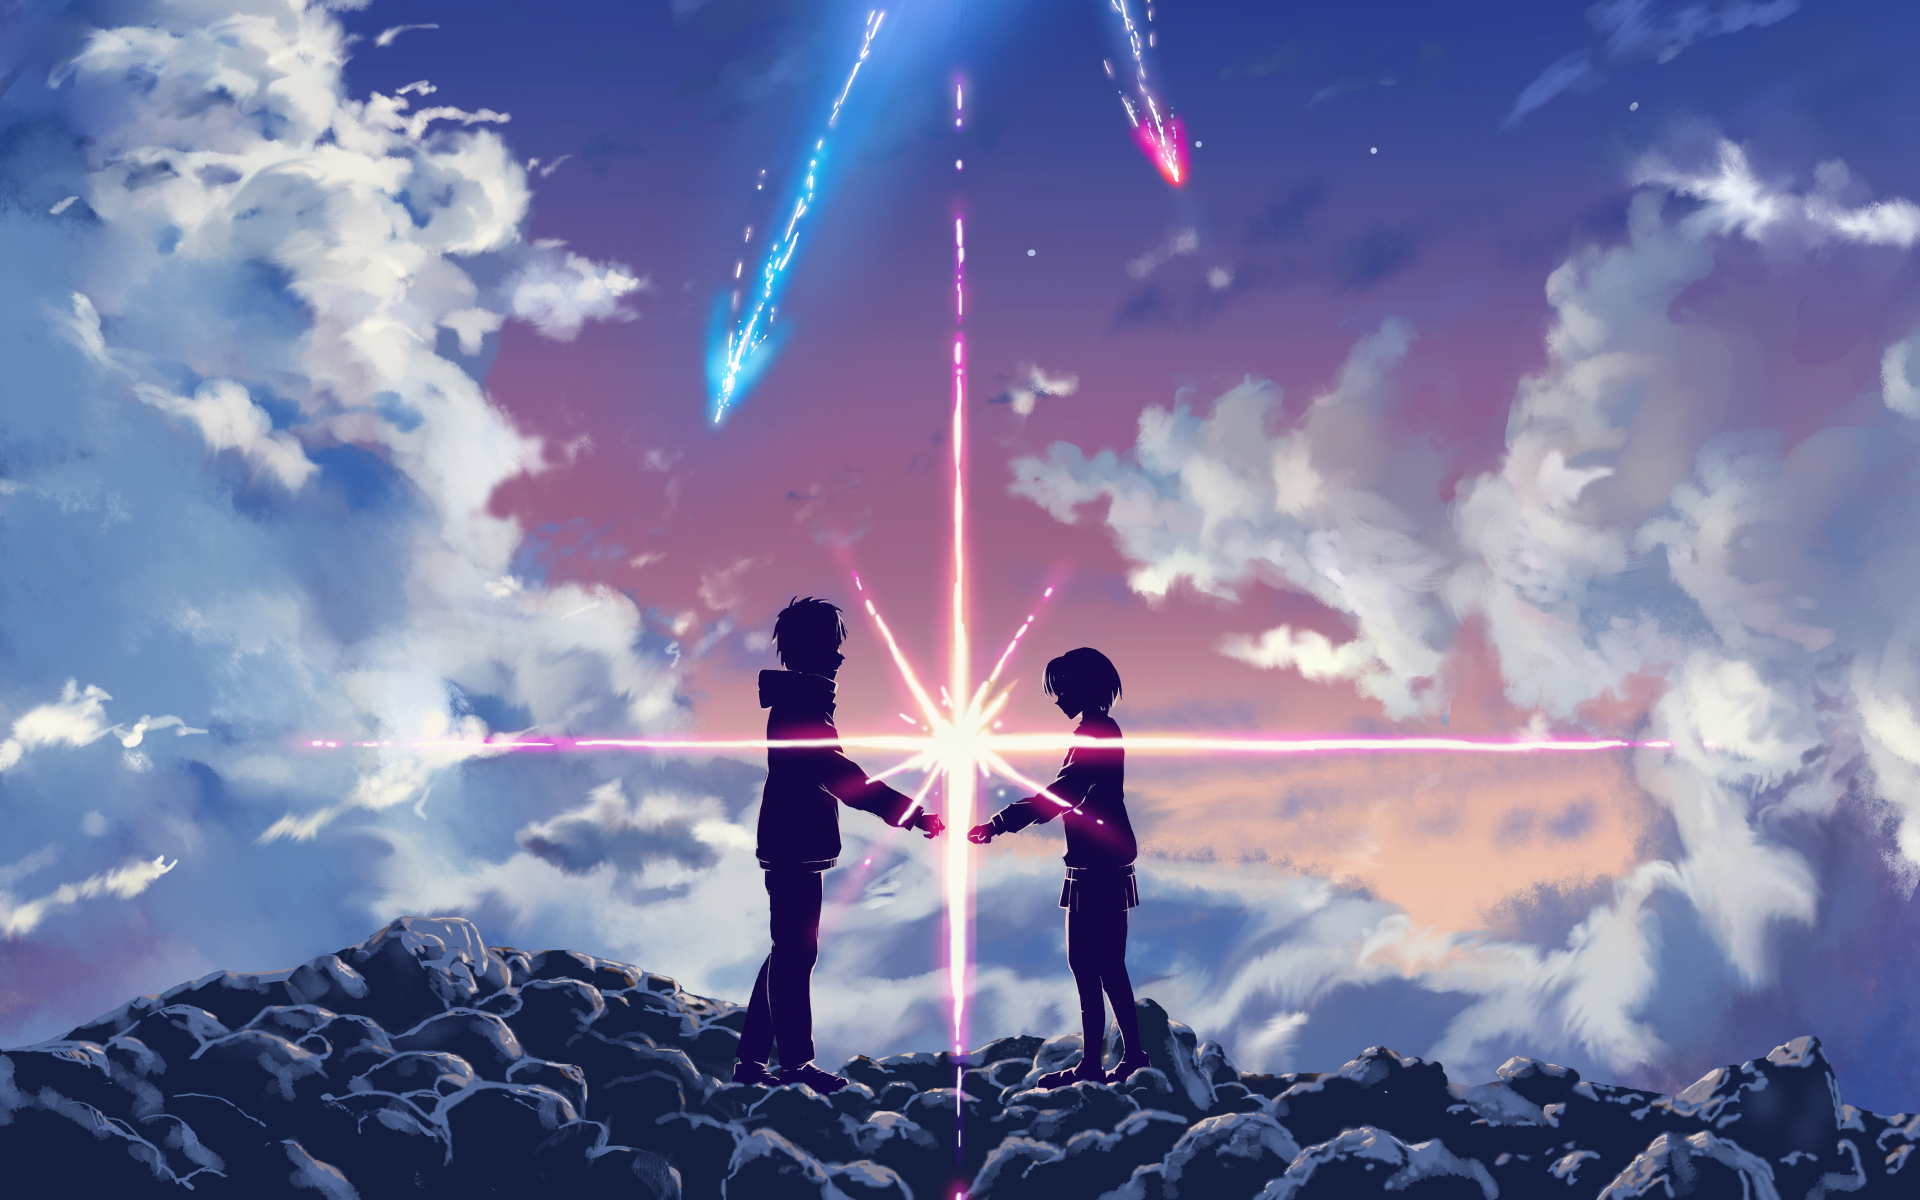 Your name hd papers and backgrounds